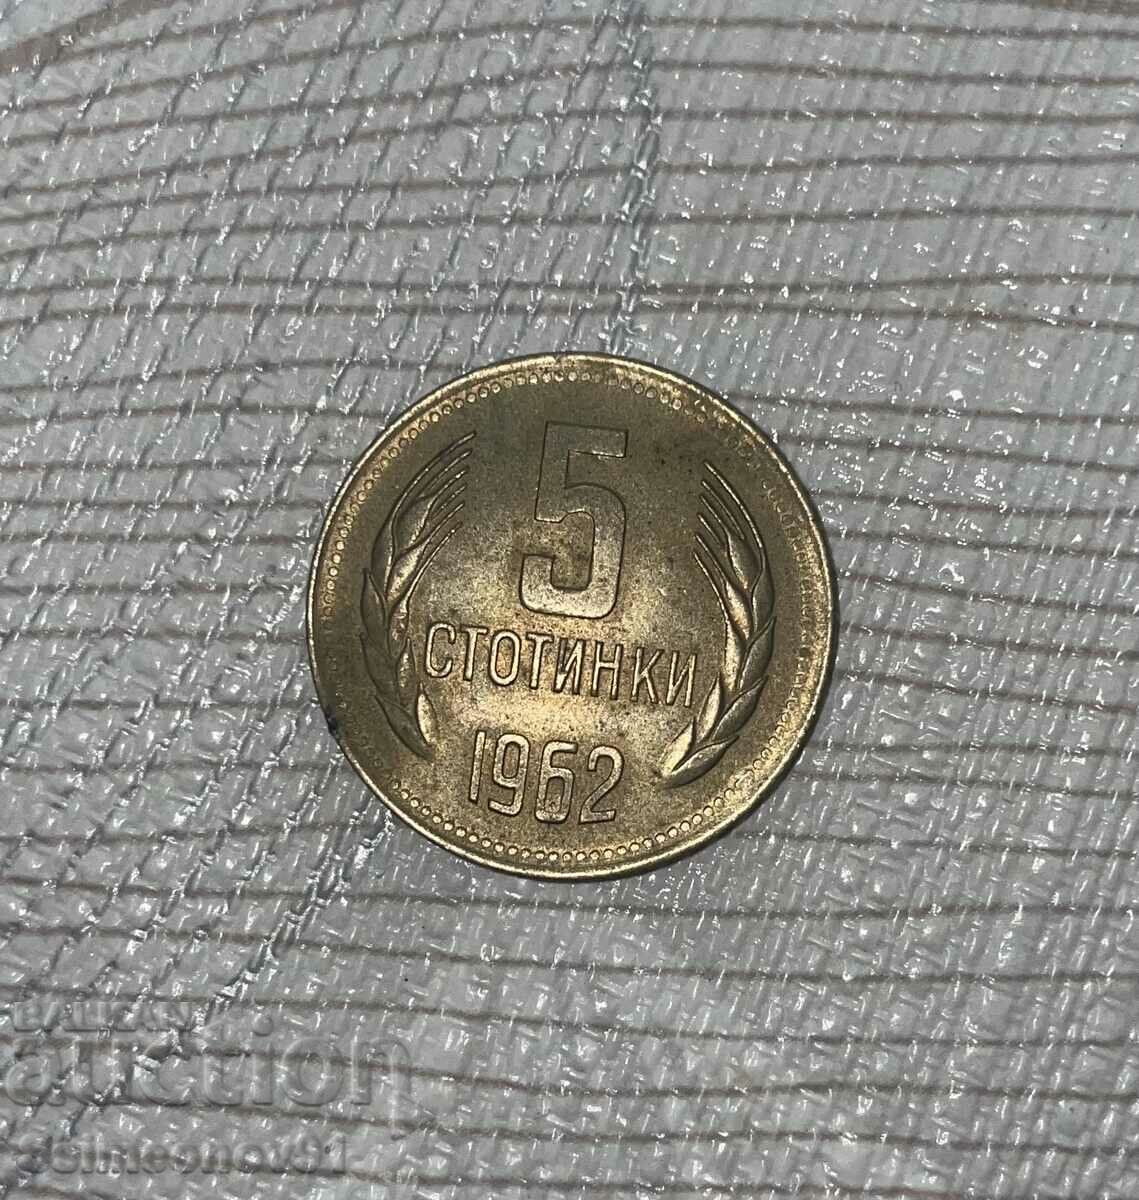 Coin 5 cents from 1962.